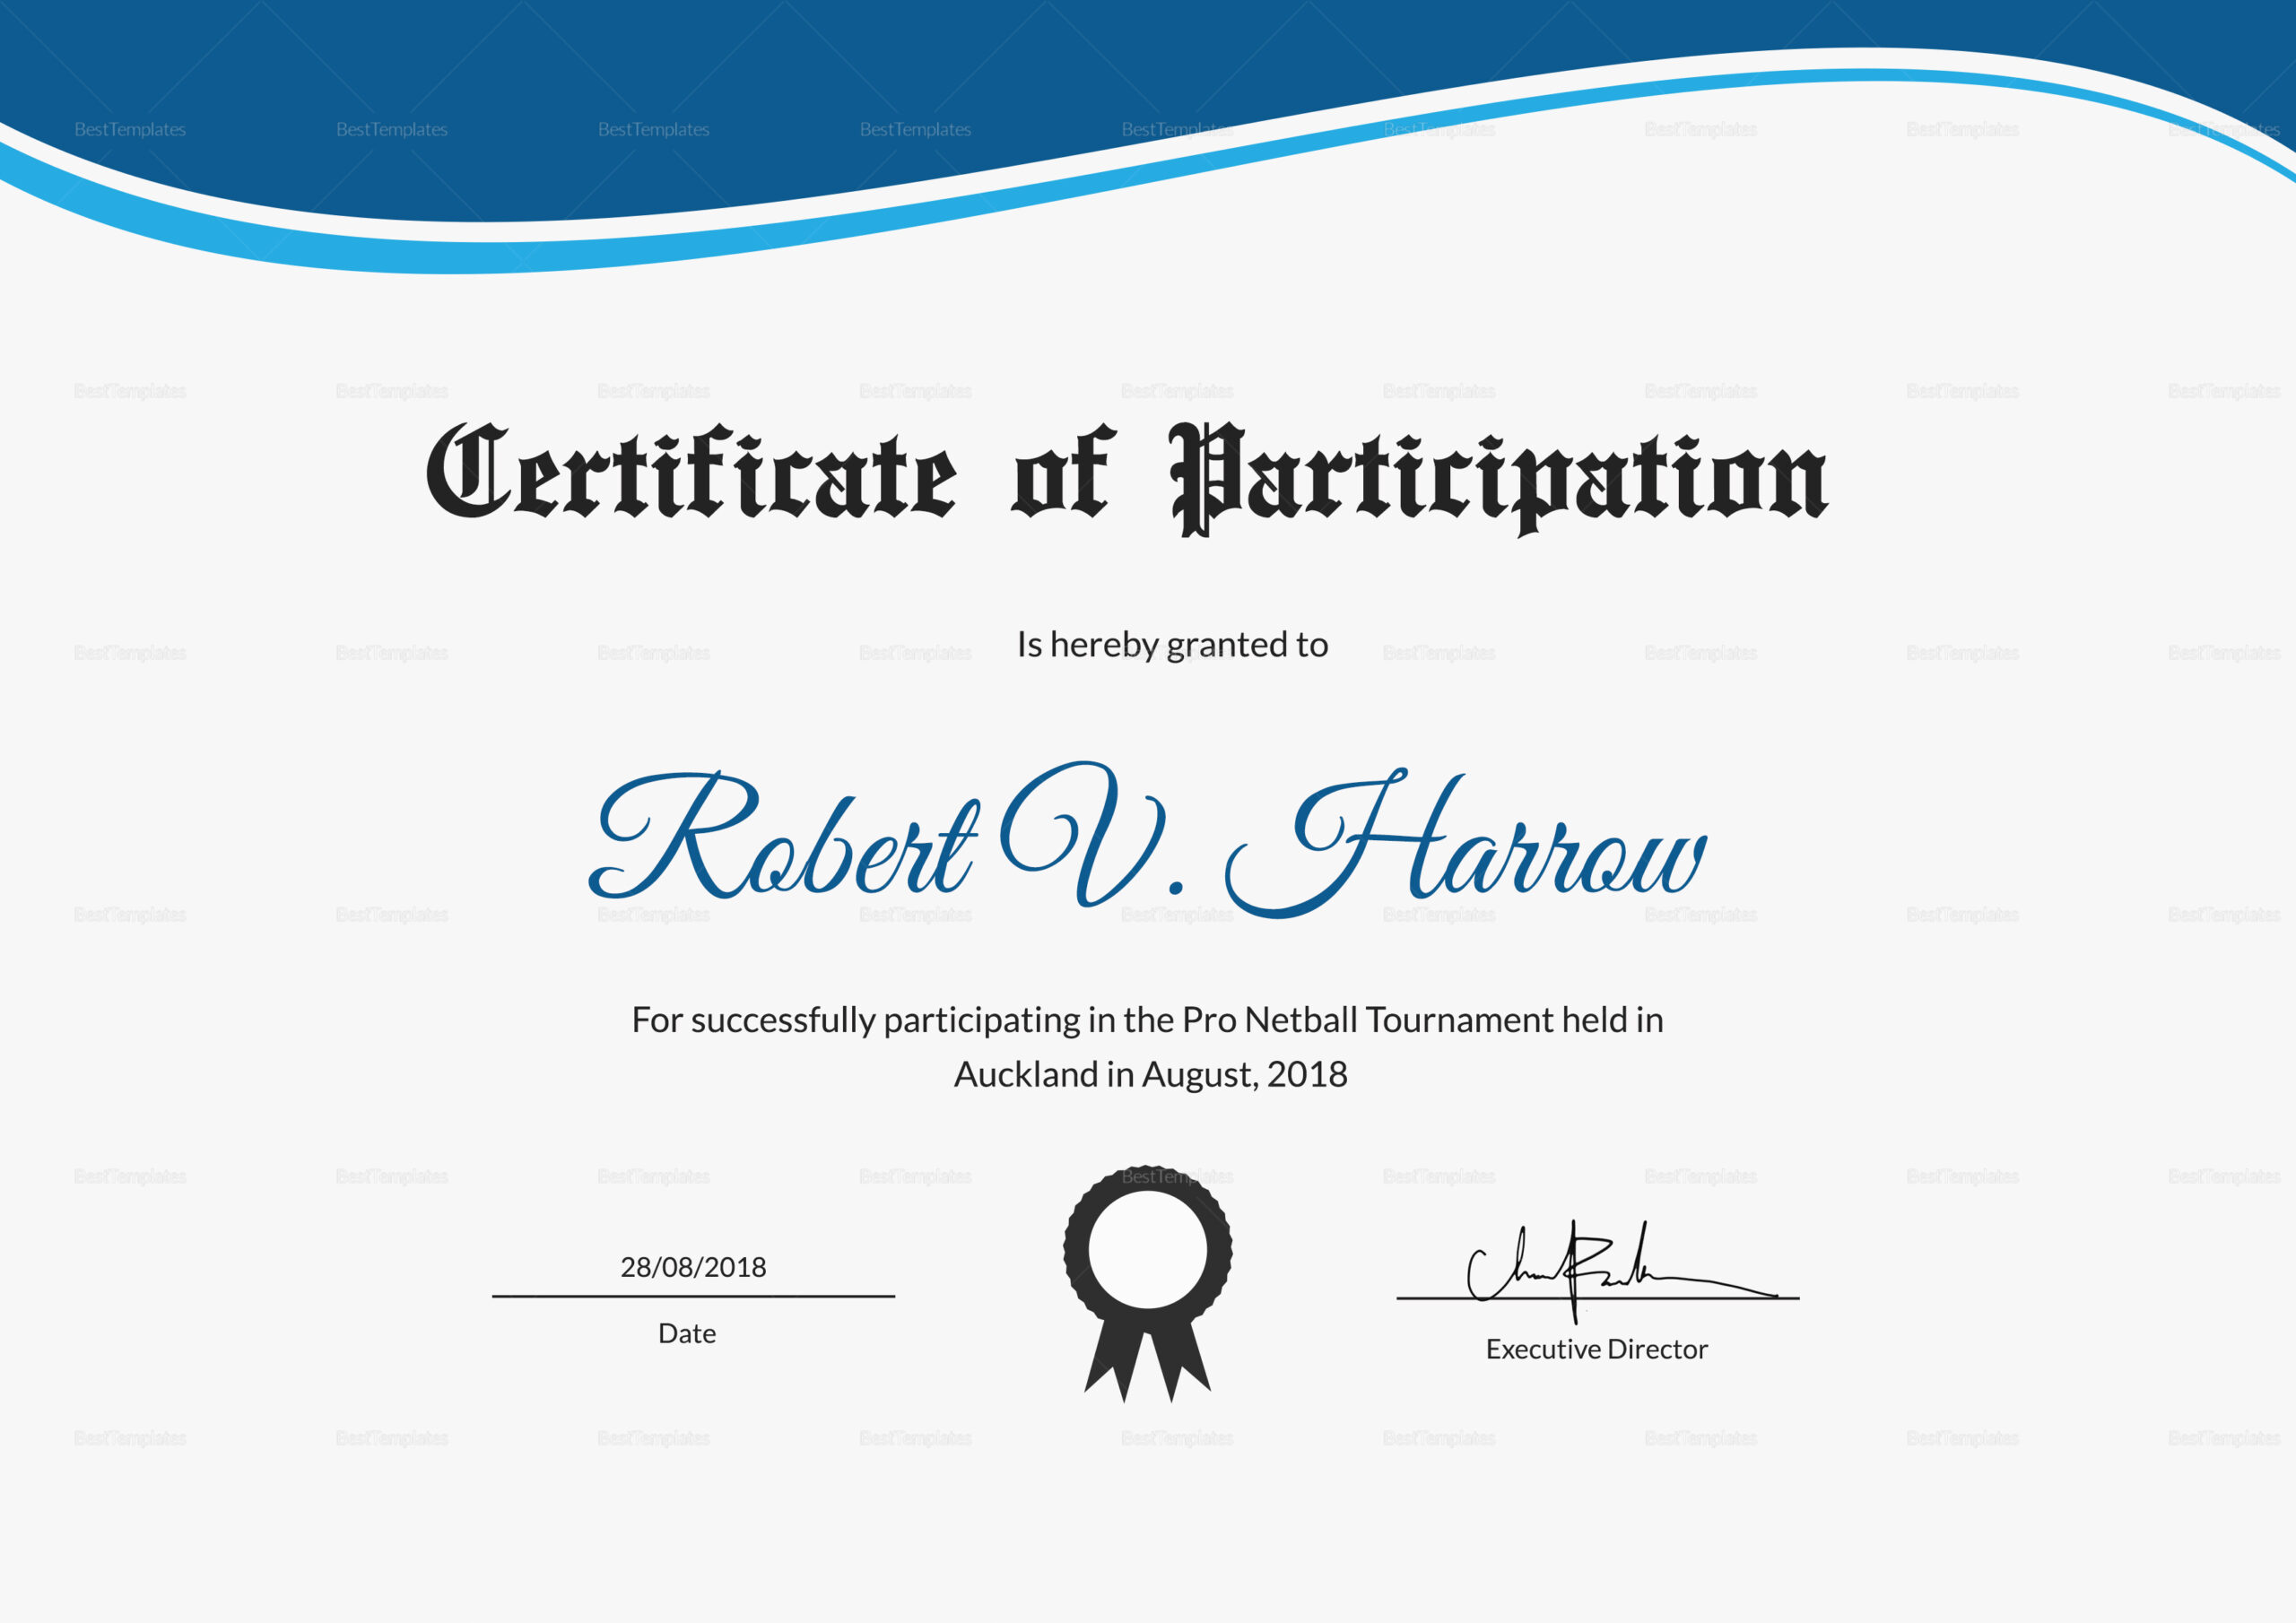 Certificate Of Participation Template Word | Creative Design Templates throughout Certification Of Participation Free Template